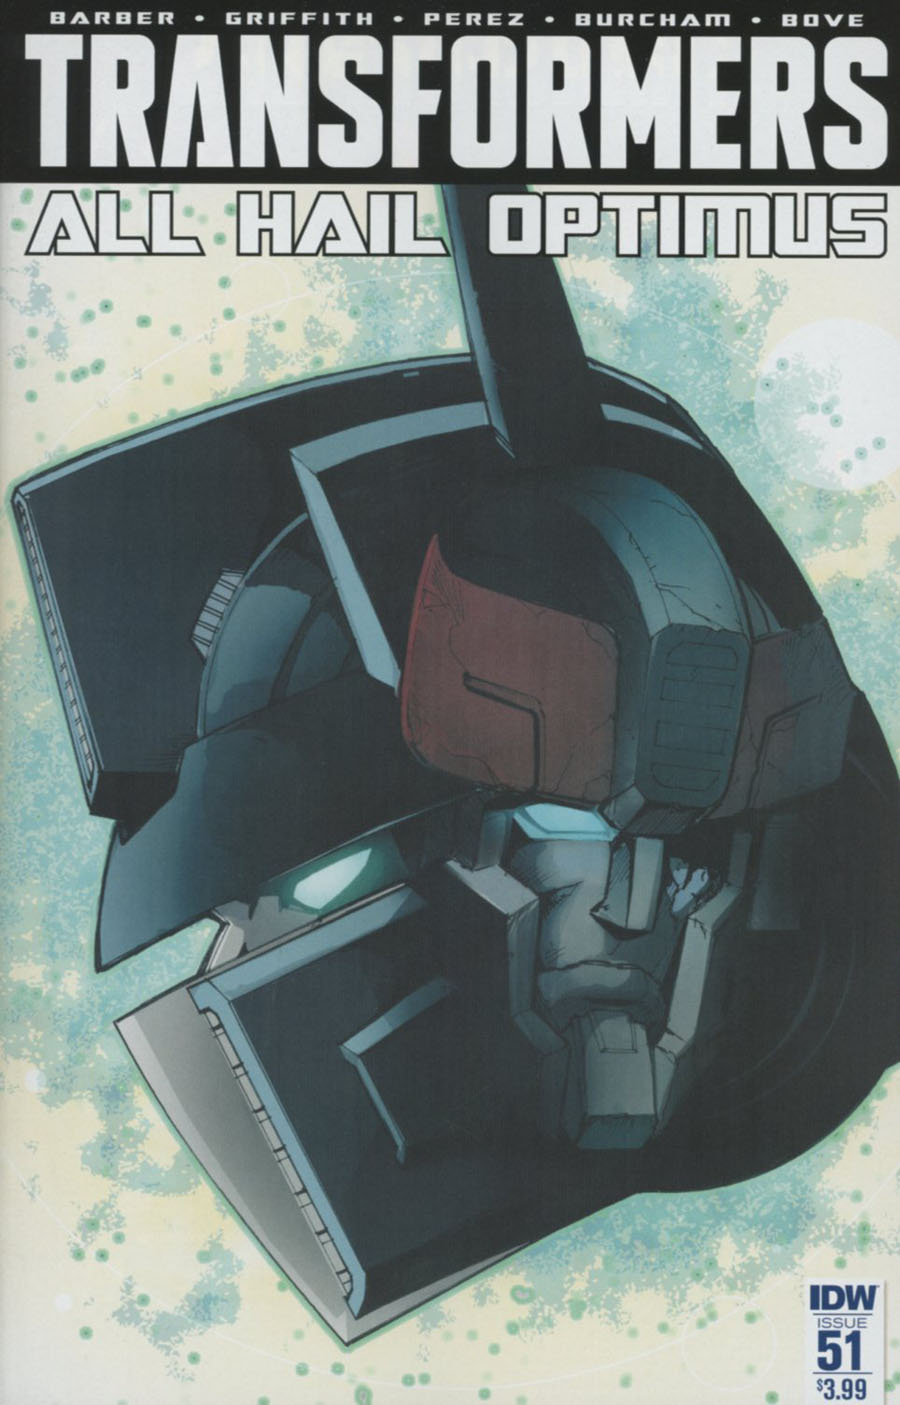 Transformers Vol 3 #51 Cover A Regular Andrew Griffith Cover